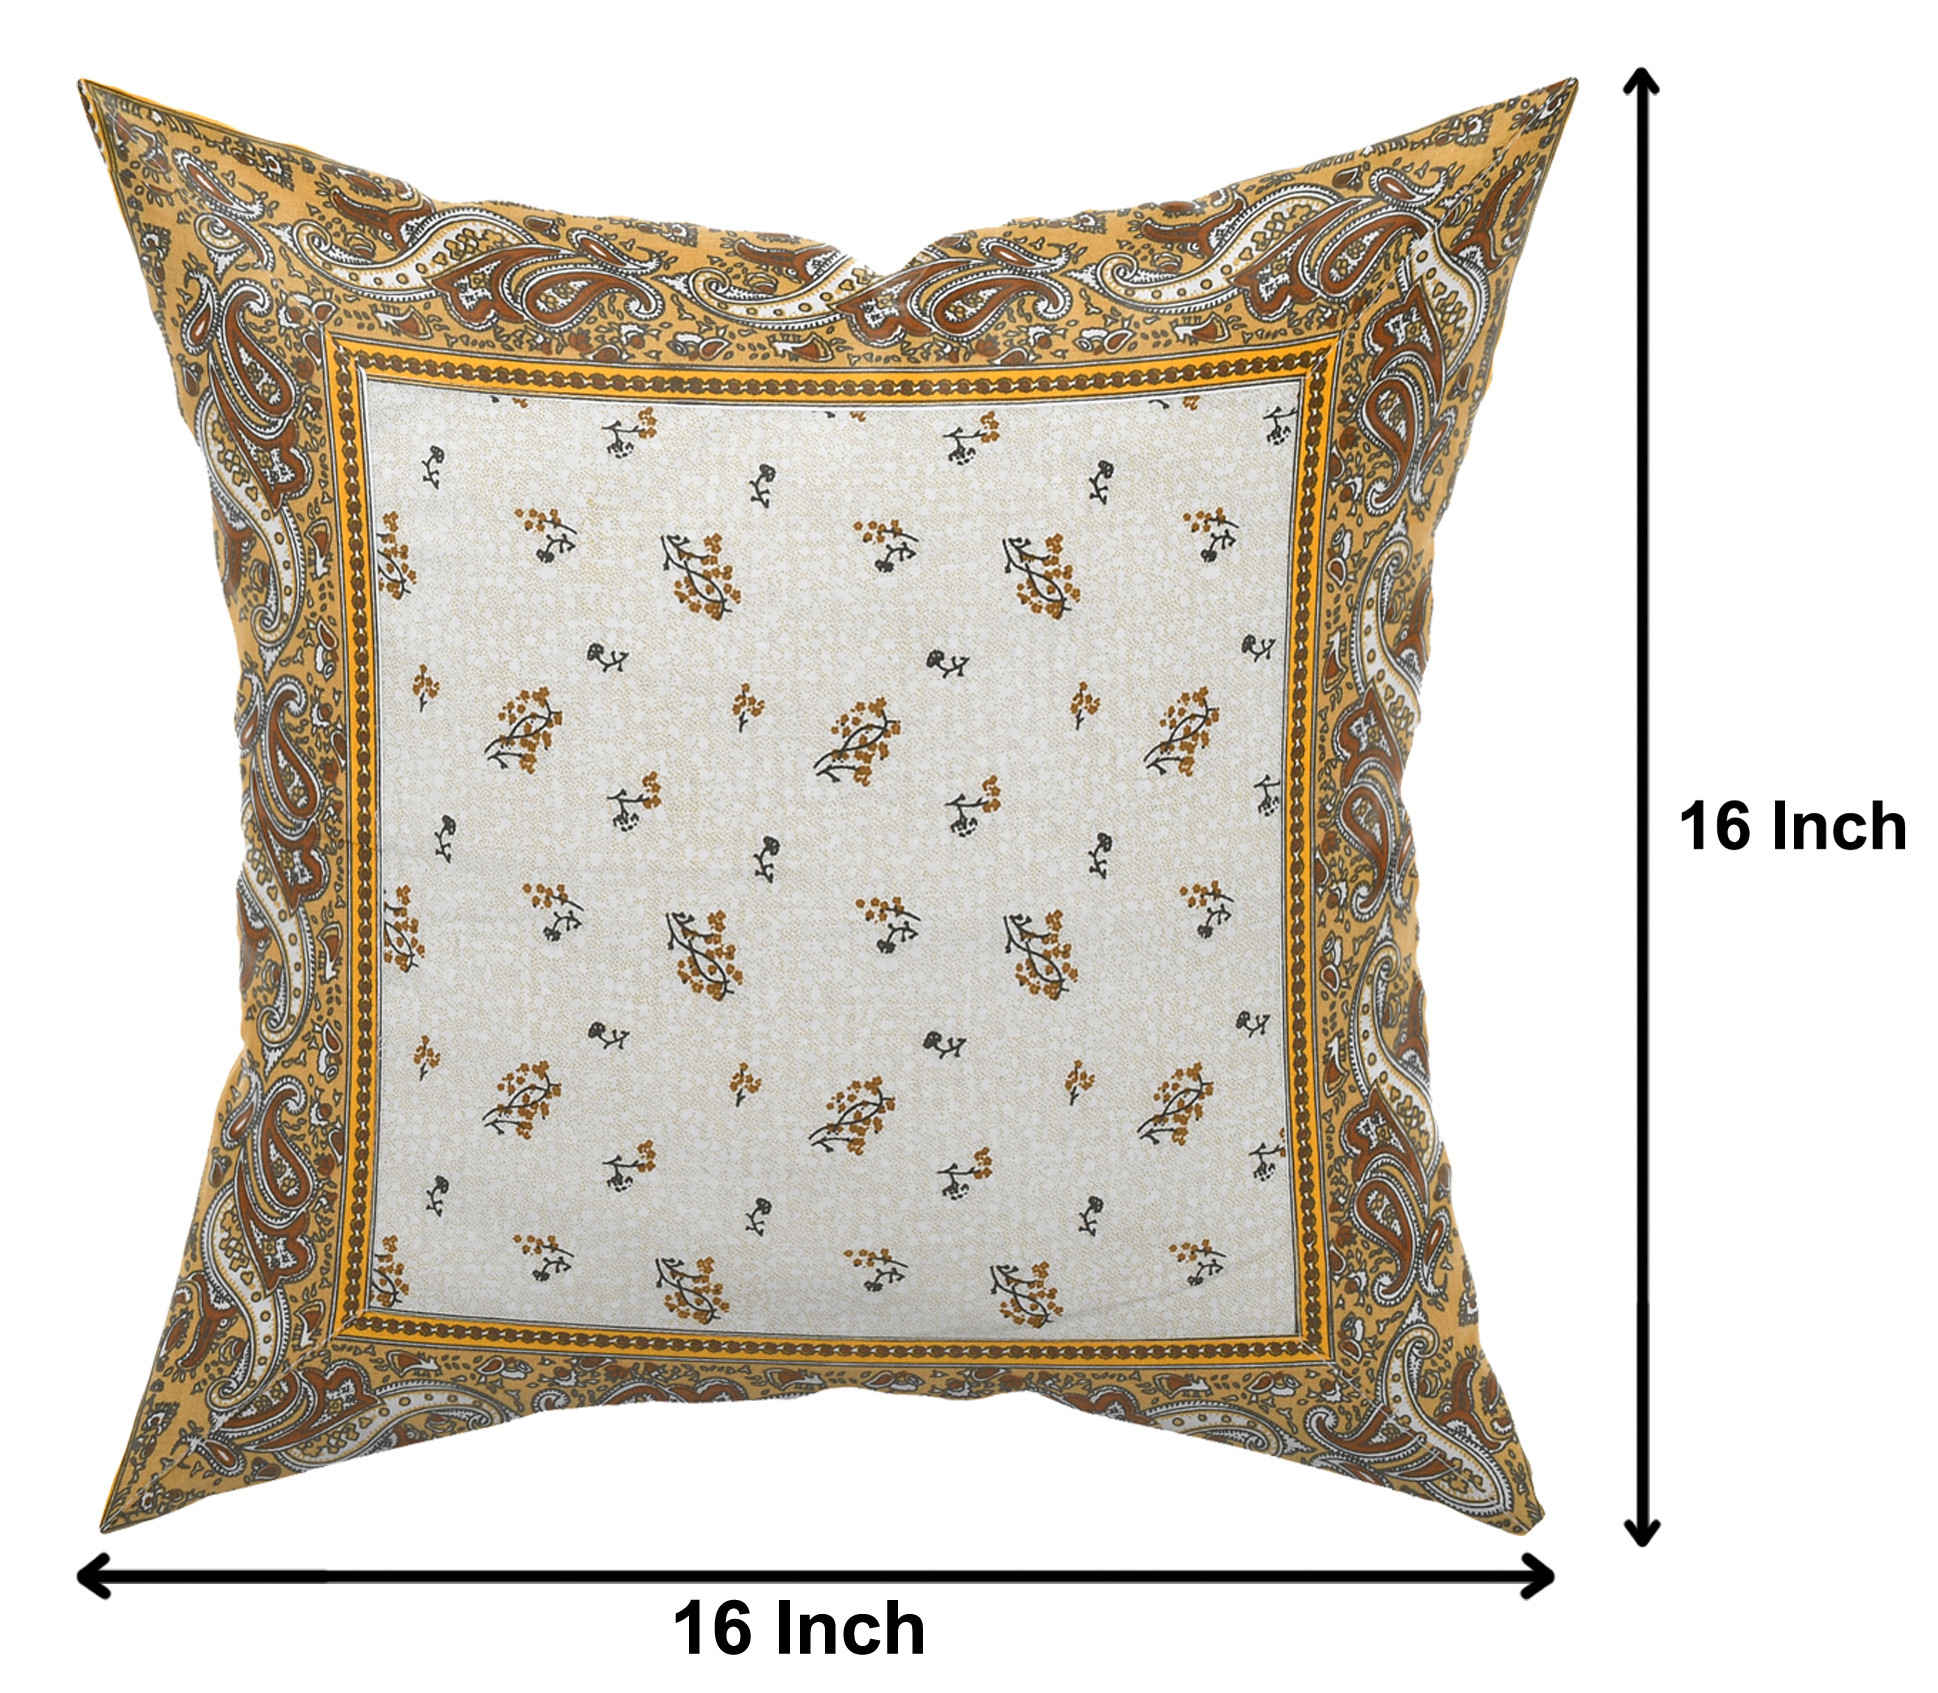 Kuber Industries Floral Design Cotton Abstract Decorative Throw Pillow/Cushion Covers 16